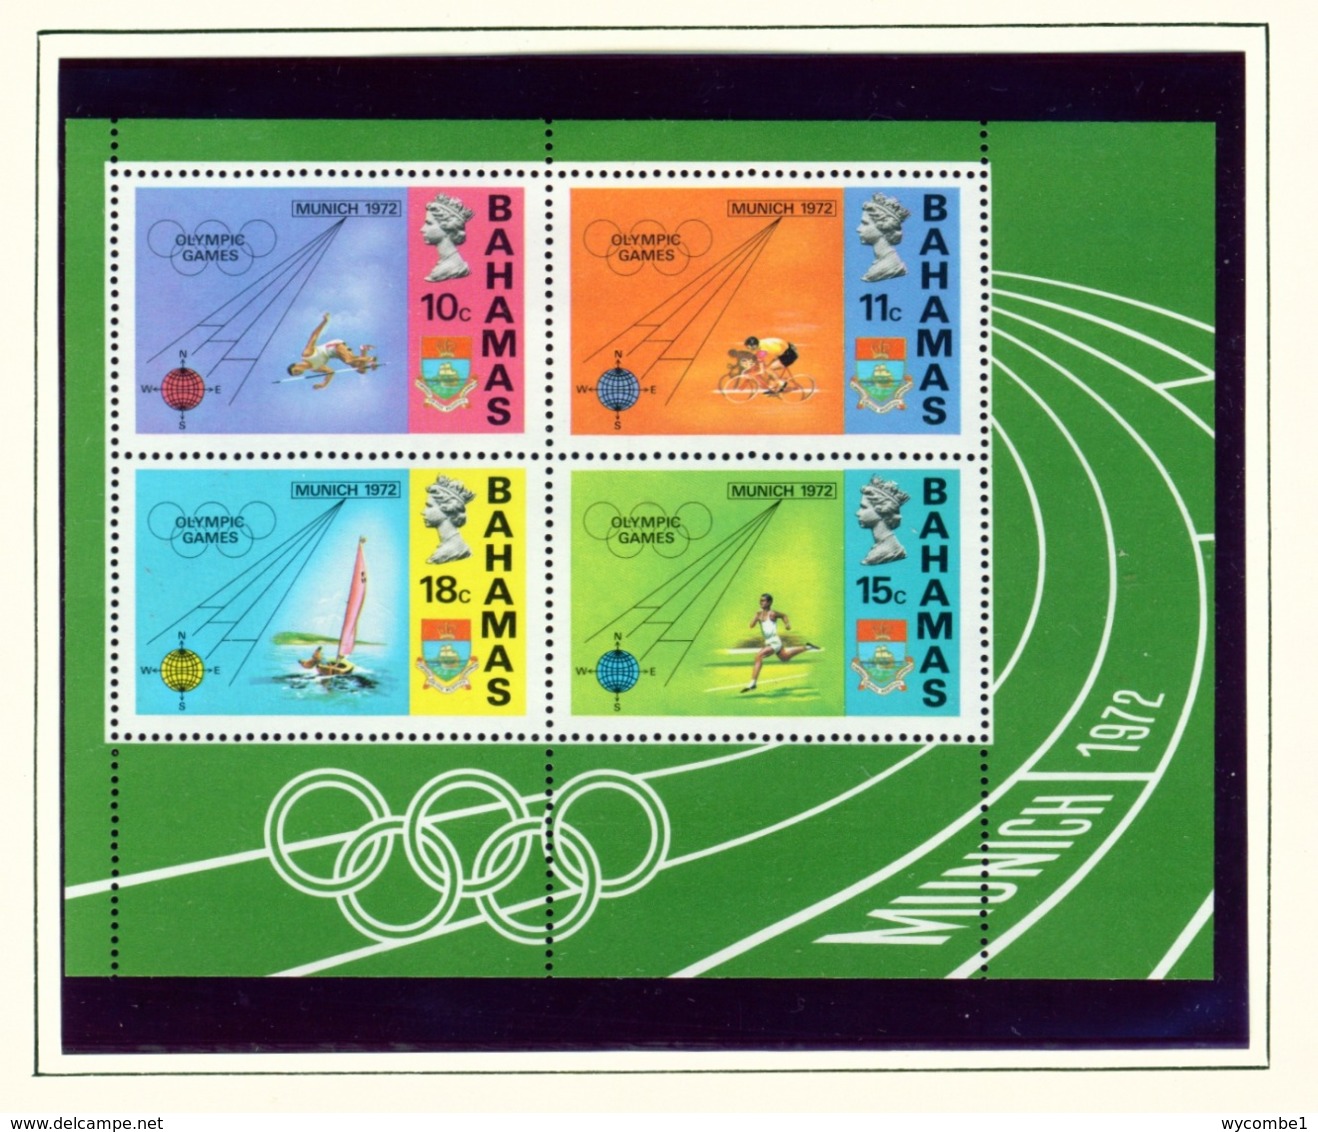 BAHAMAS  -  1972 Olympic Games Miniature Sheet Unmounted/Never Hinged Mint - 1963-1973 Ministerial Government